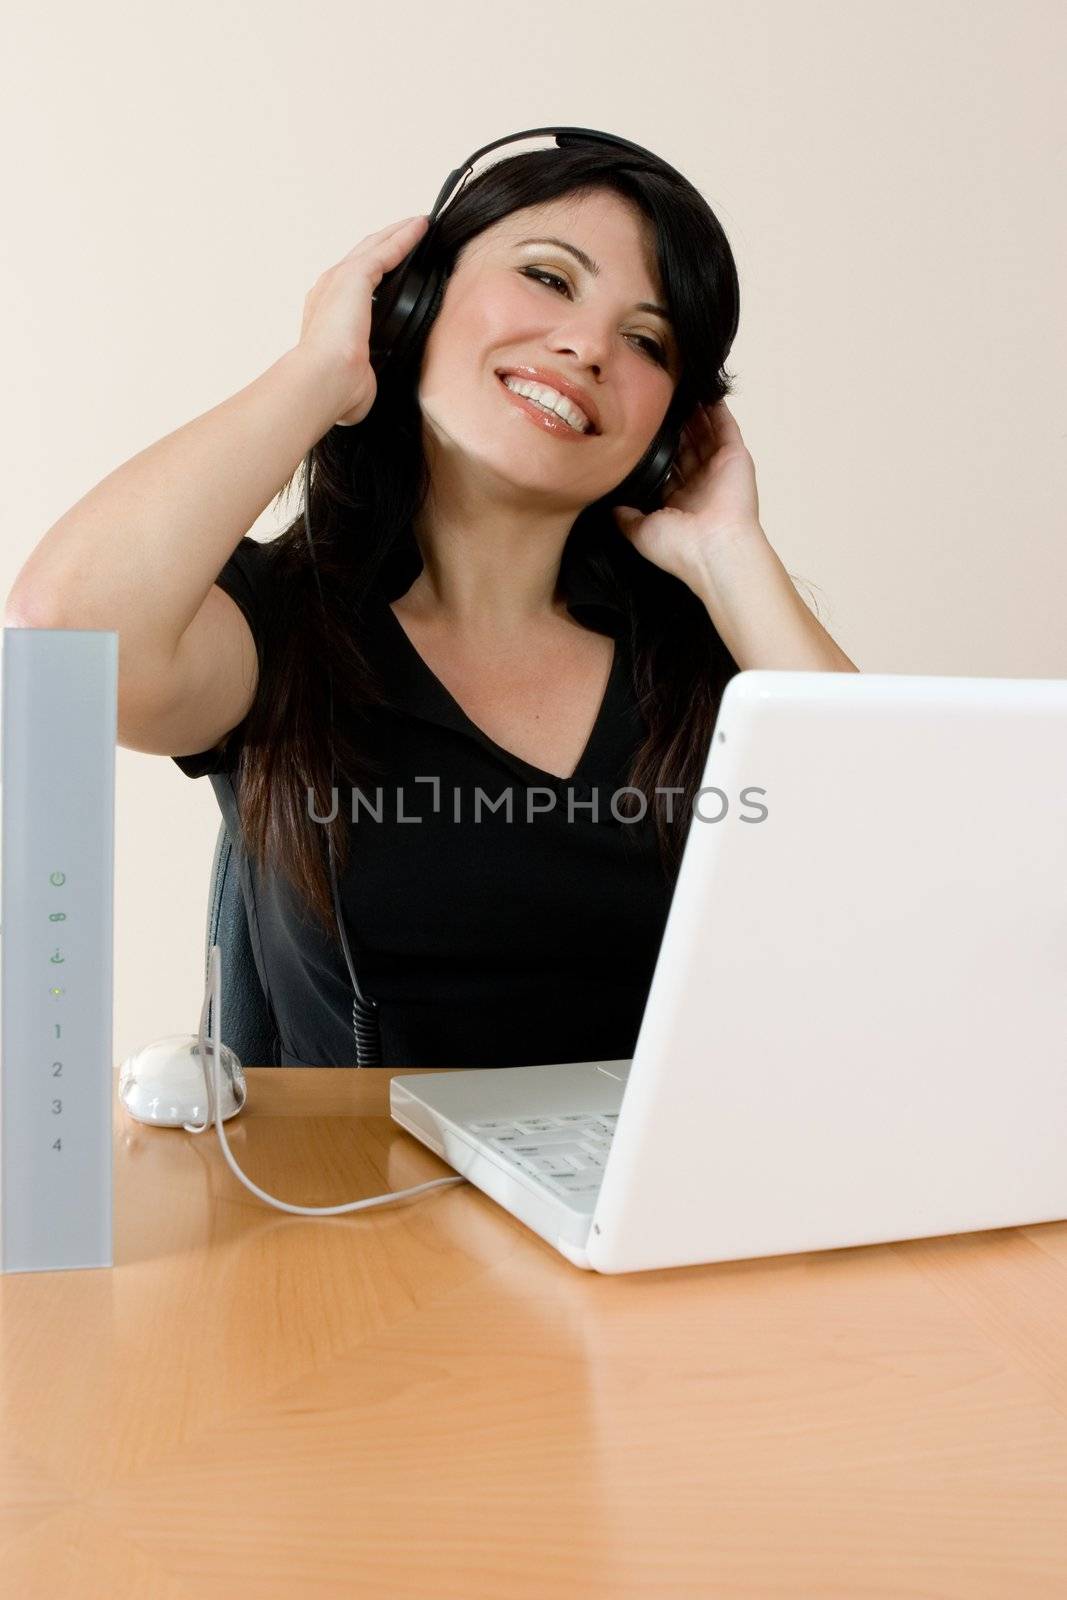 A woman listens to streaming music or video or music downloaded from the internet.